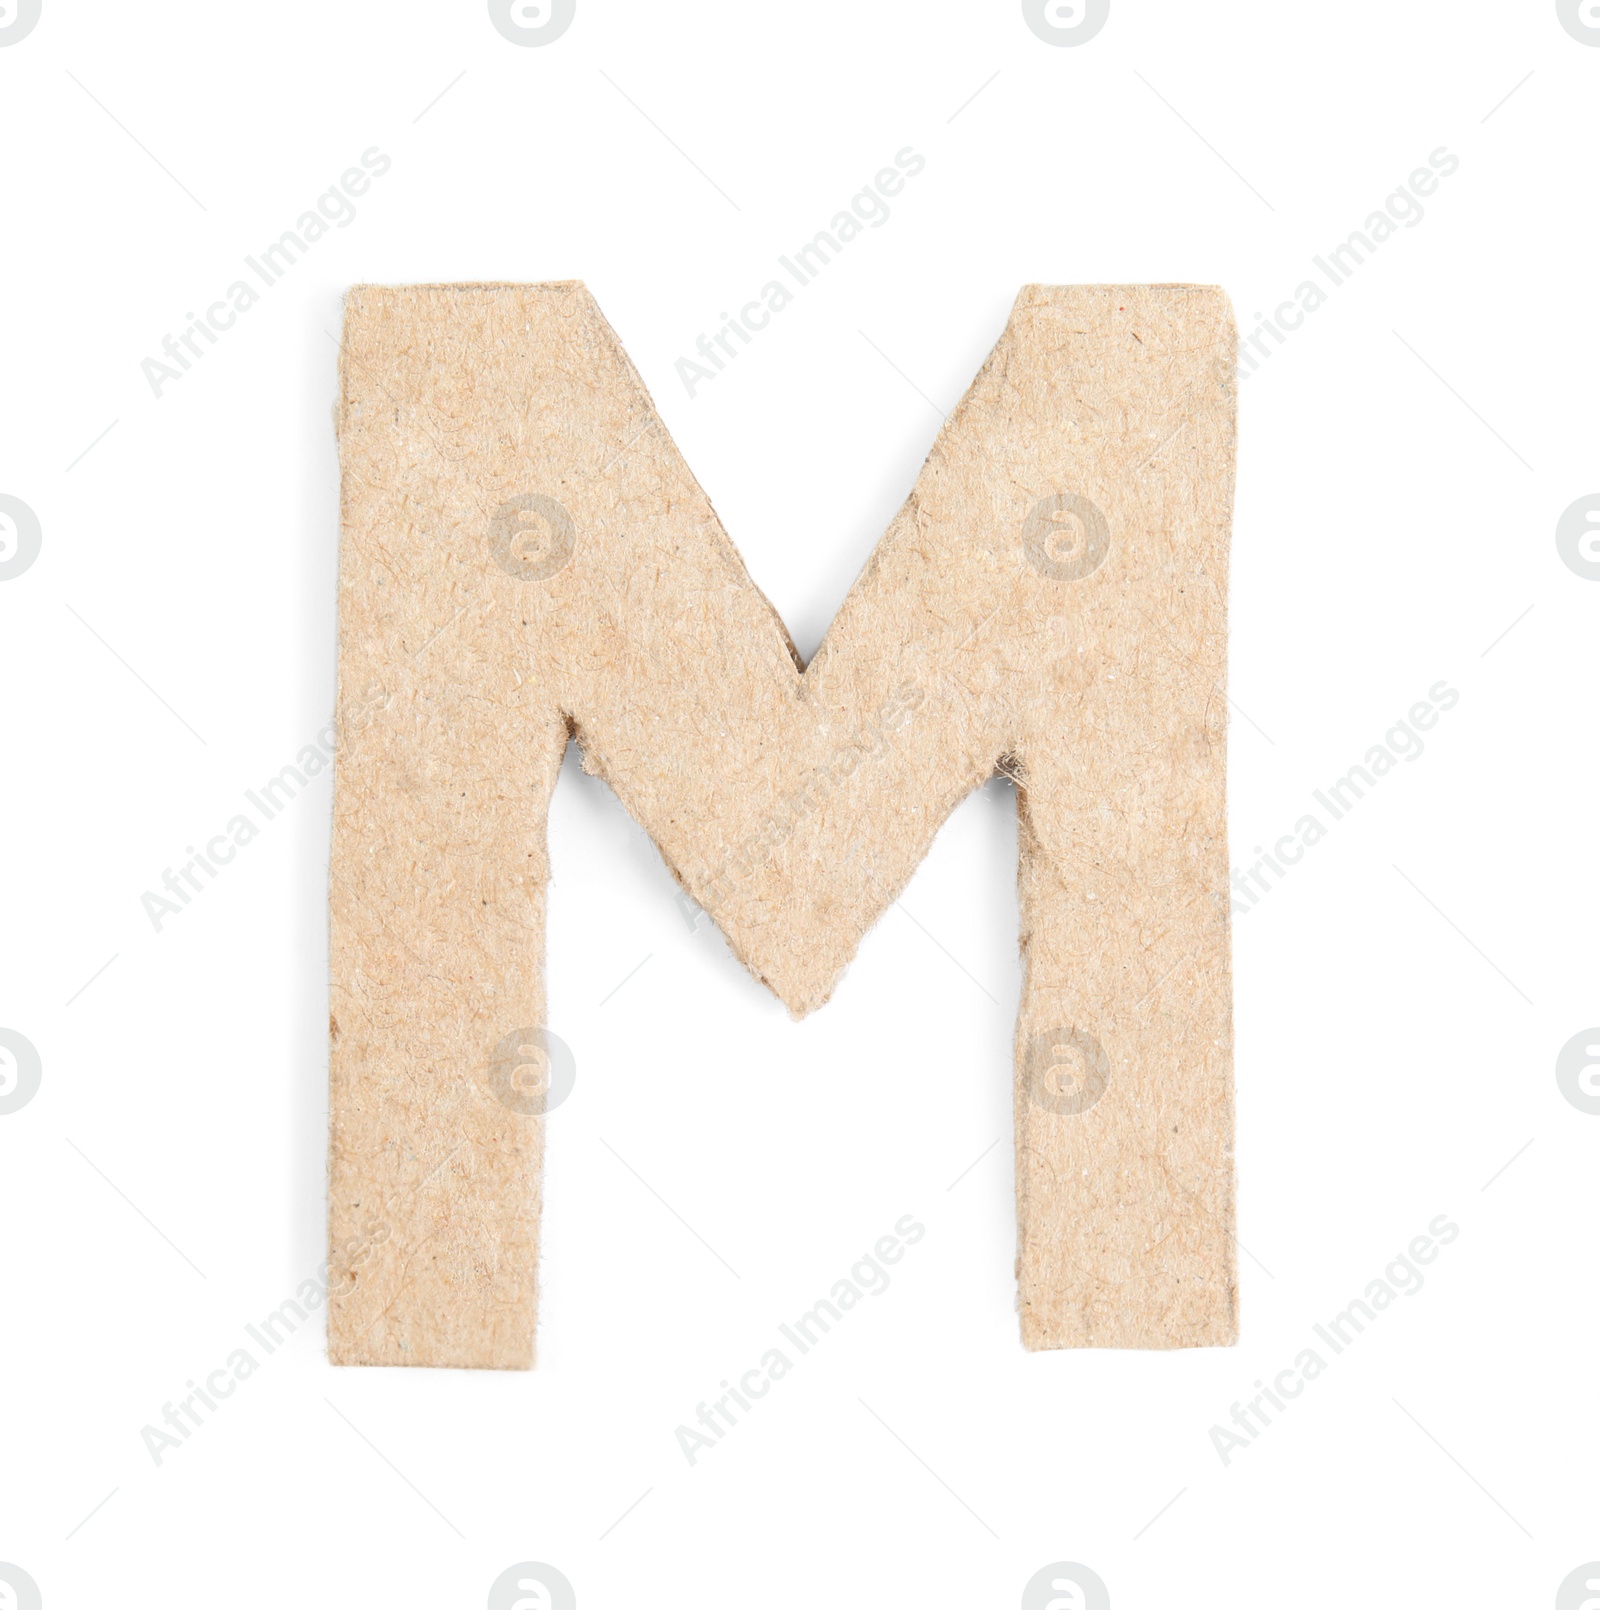 Photo of Letter M made of cardboard isolated on white